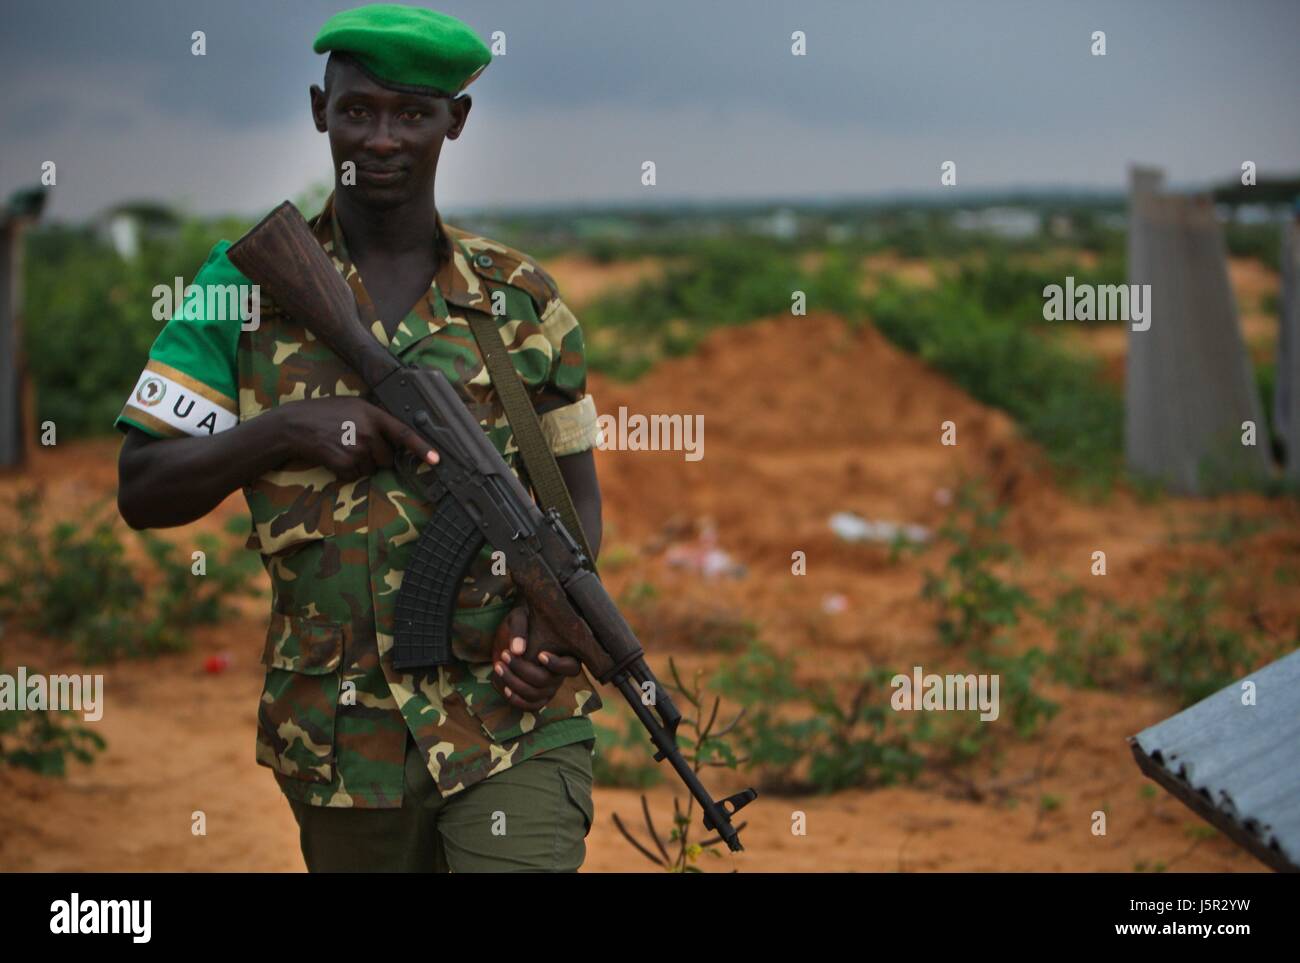 An African Union Mission in Somalia (AMISOM) Burundian soldier patrols the frontline in a territory recently captured from insurgents in the Deynile District November 17, 2011 near Mogadishu, Somalia.    (photo by Stuart Price/ANISOM via Planetpix) Stock Photo